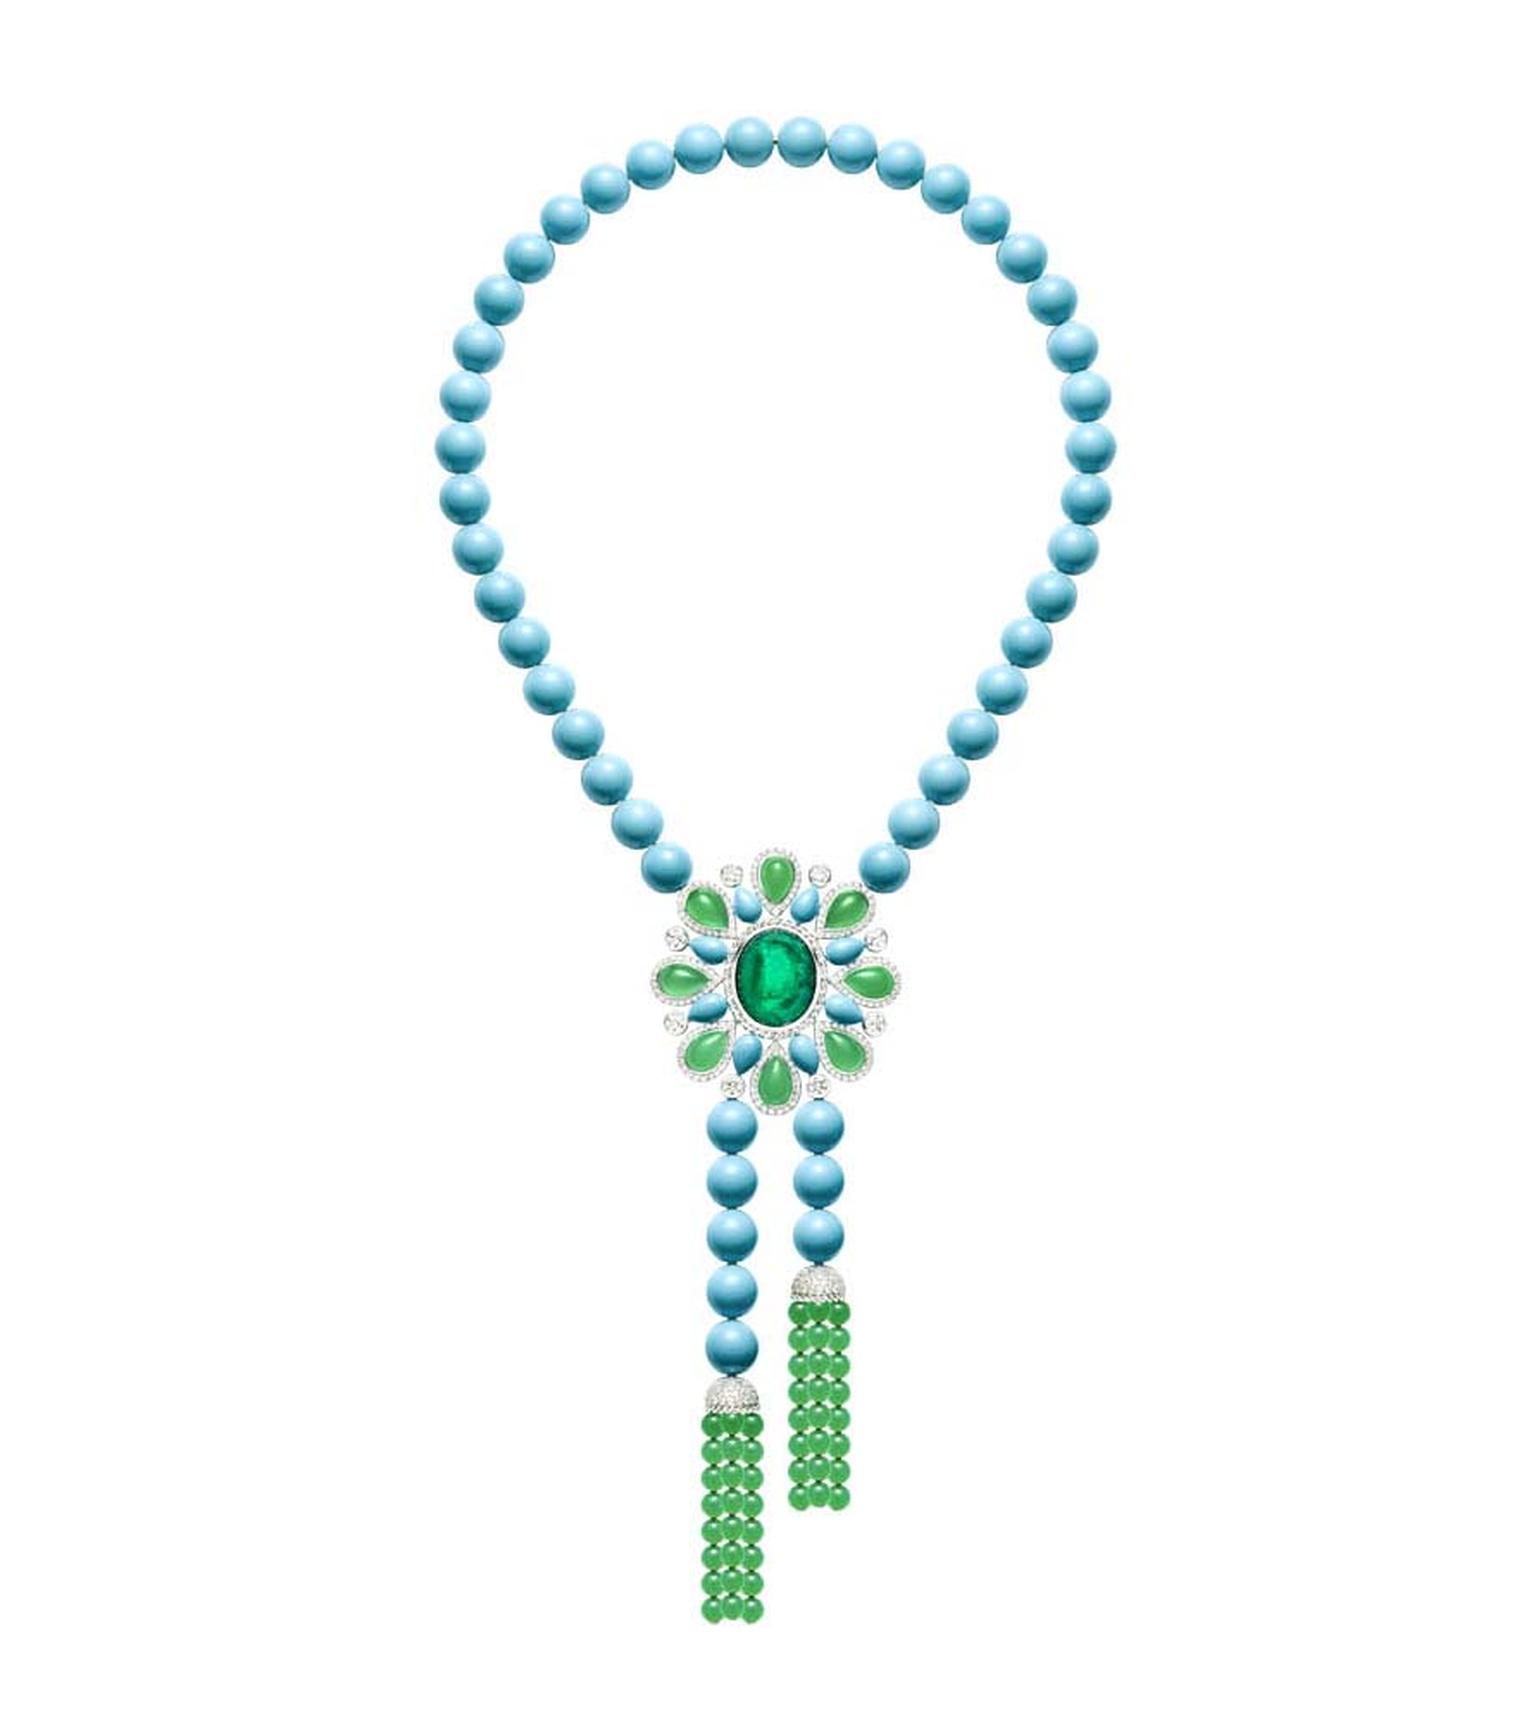 18ct white gold necklace by Piaget, set with turquoise and chrysophase surrounding an emerald cut cabochon, and brilliant-cut diamonds.